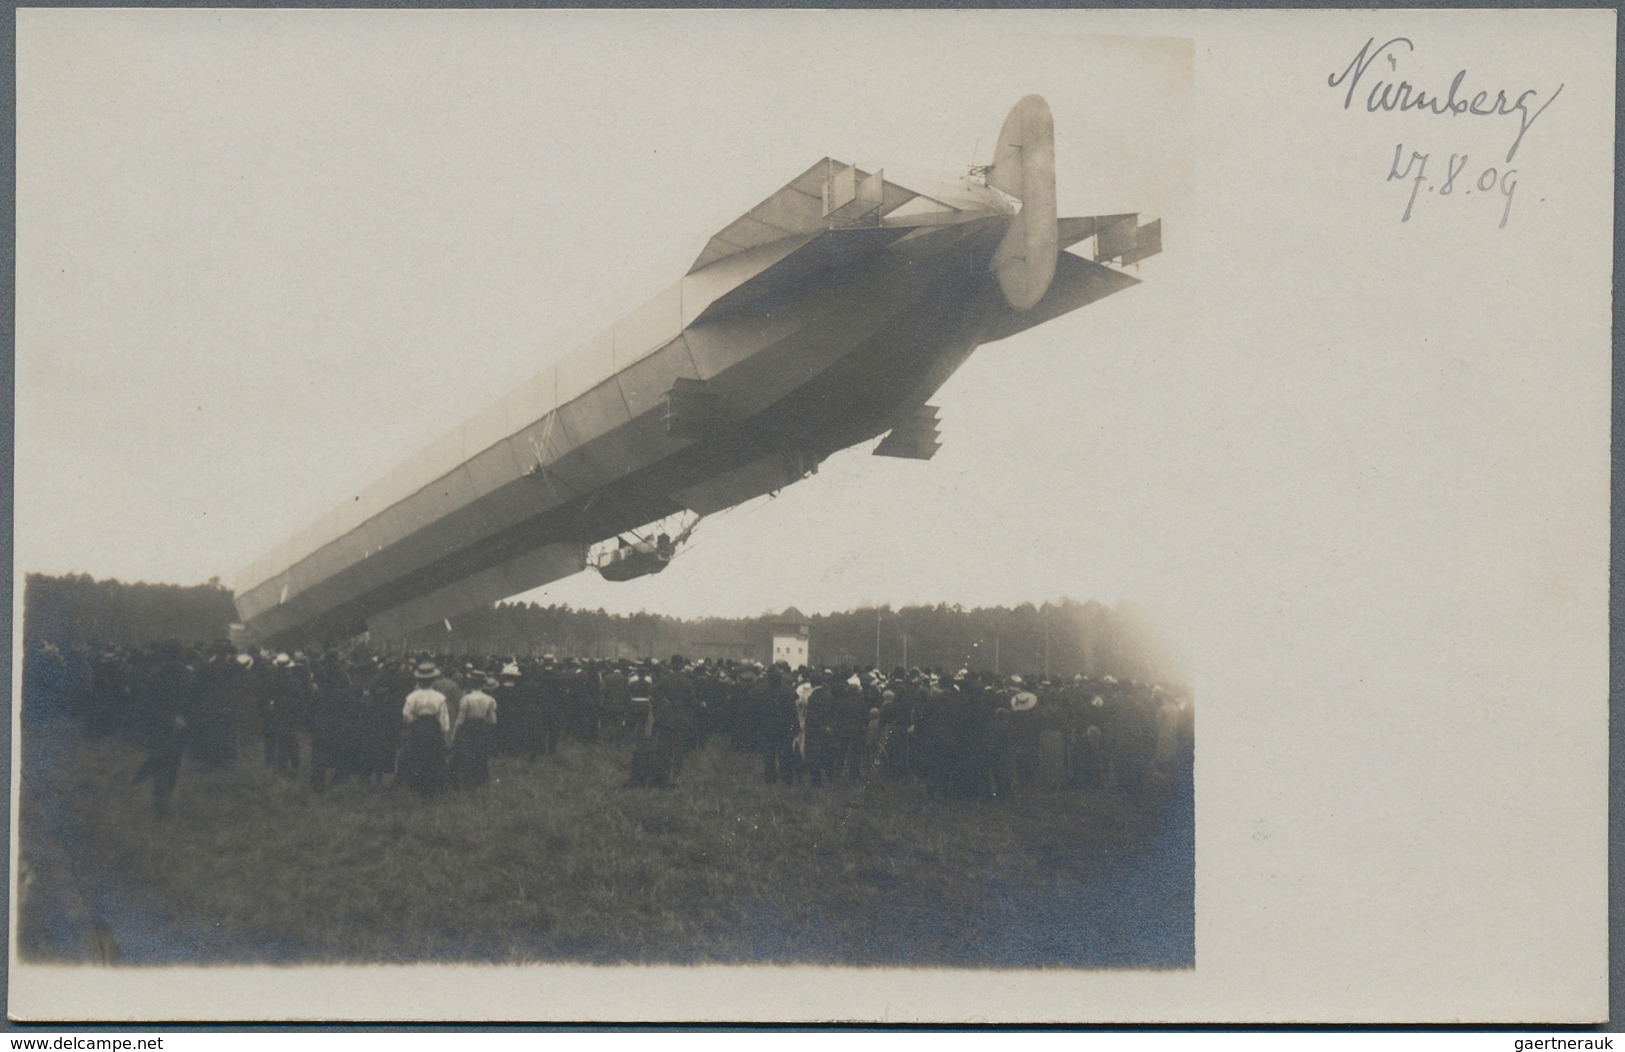 Zeppelinpost Deutschland: Ca 185 Zeppelin postcards and a few photos, with a large number of pieces